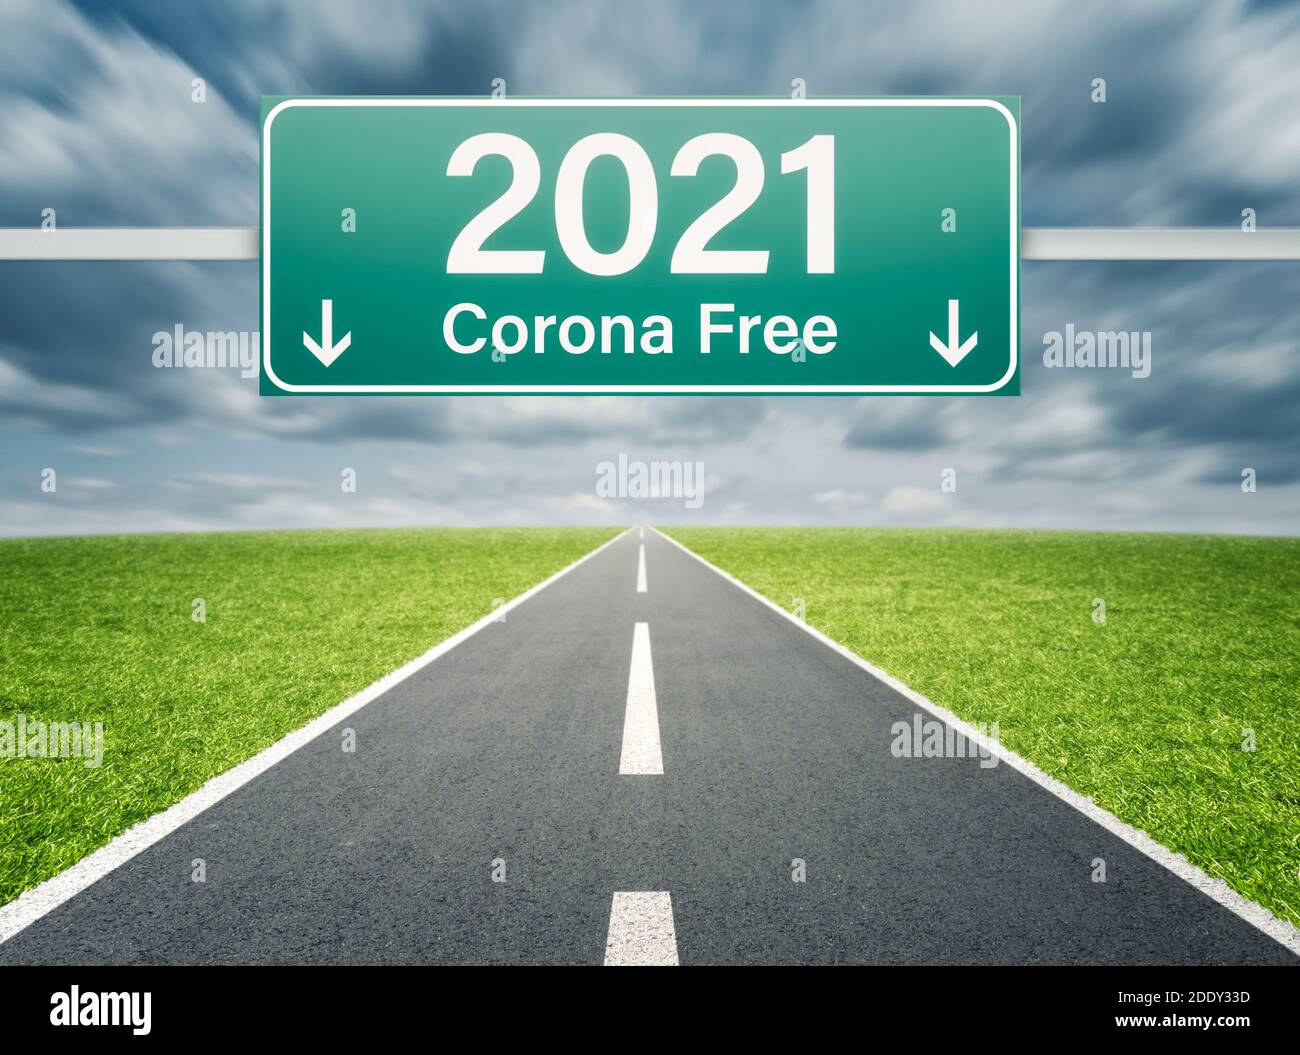 Corona Free in 2021 concept with road and sign Stock Photo